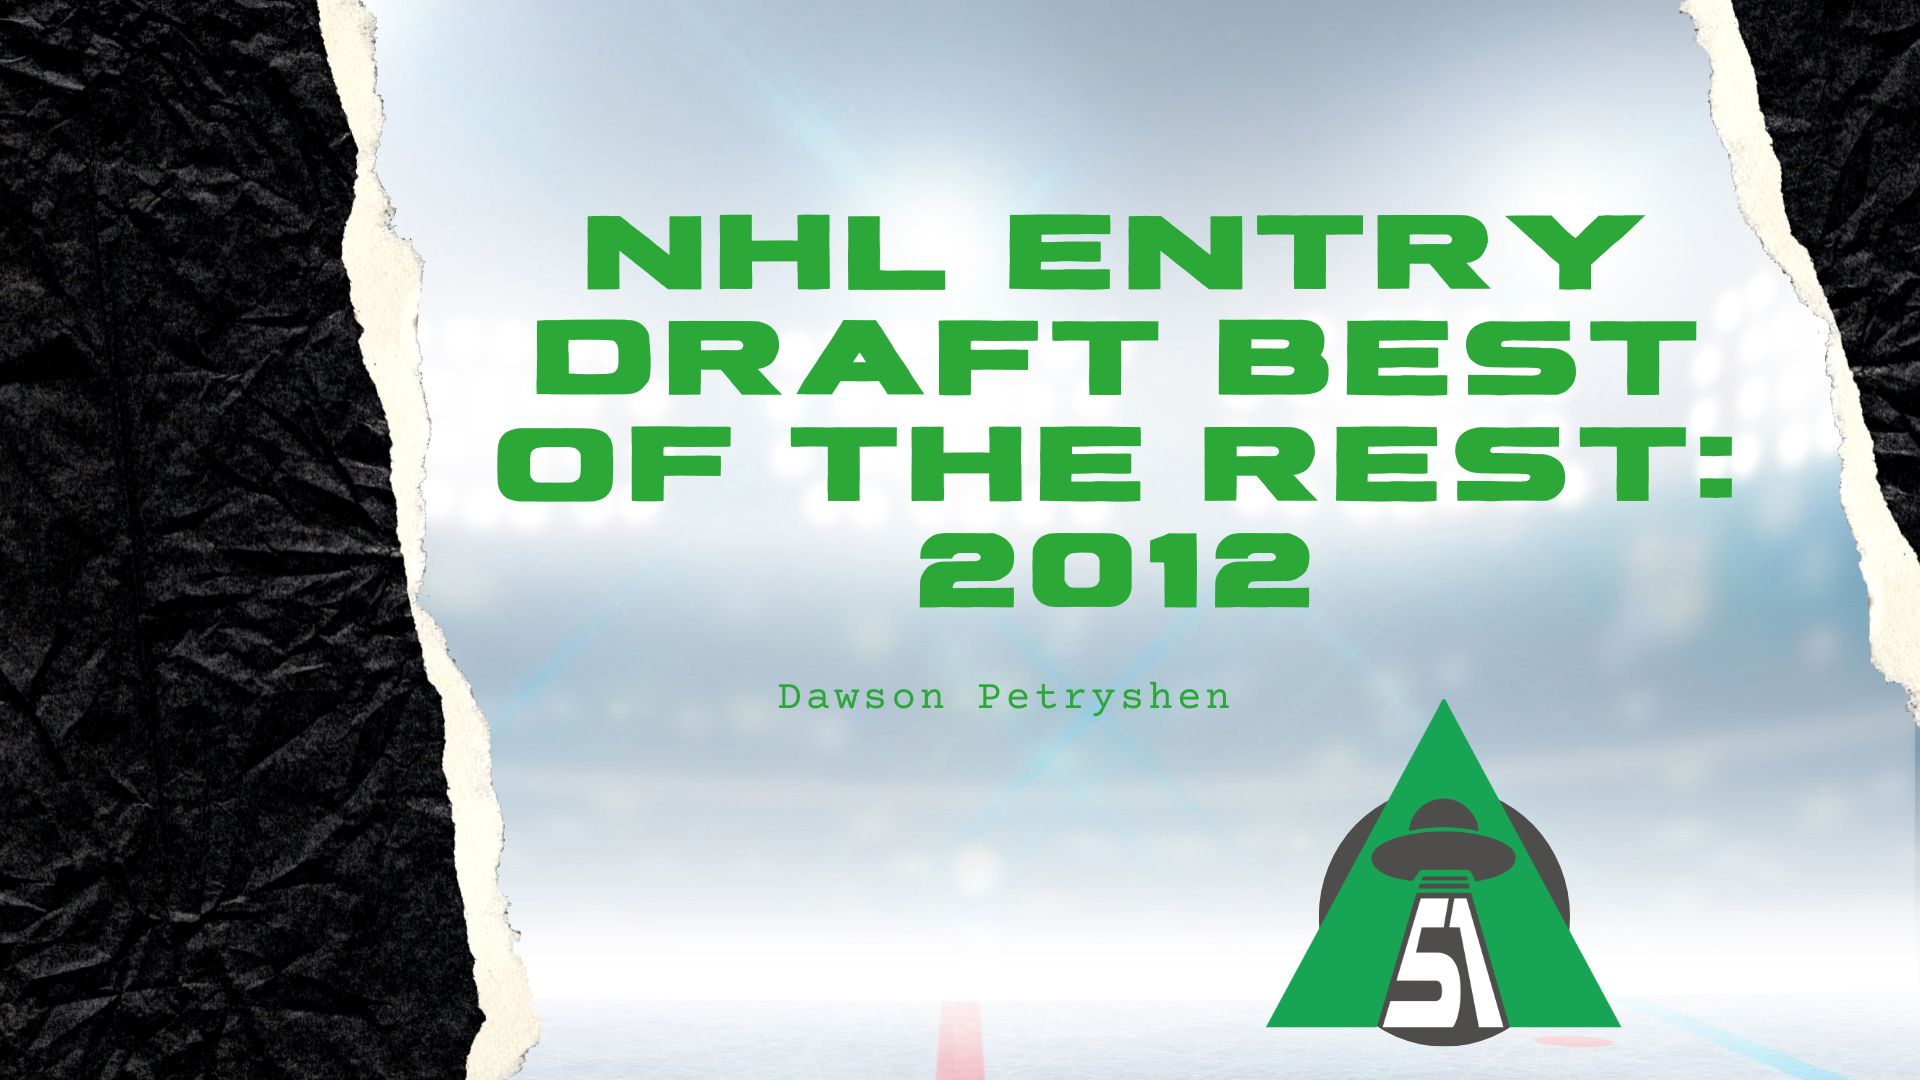 NHL Entry Draft Best of the Rest: 2012